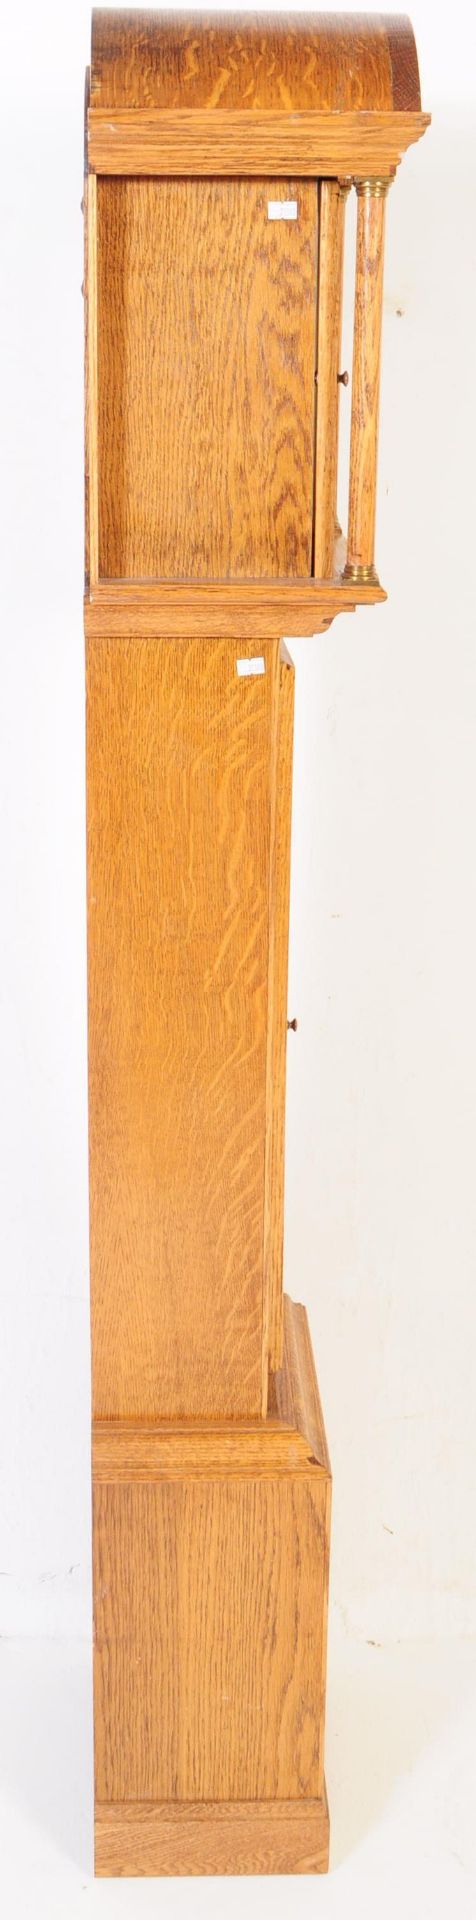 EARLY 20TH CENTURY ARTS & CRAFTS OAK GRANDMOTHER CLOCK - Image 8 of 9